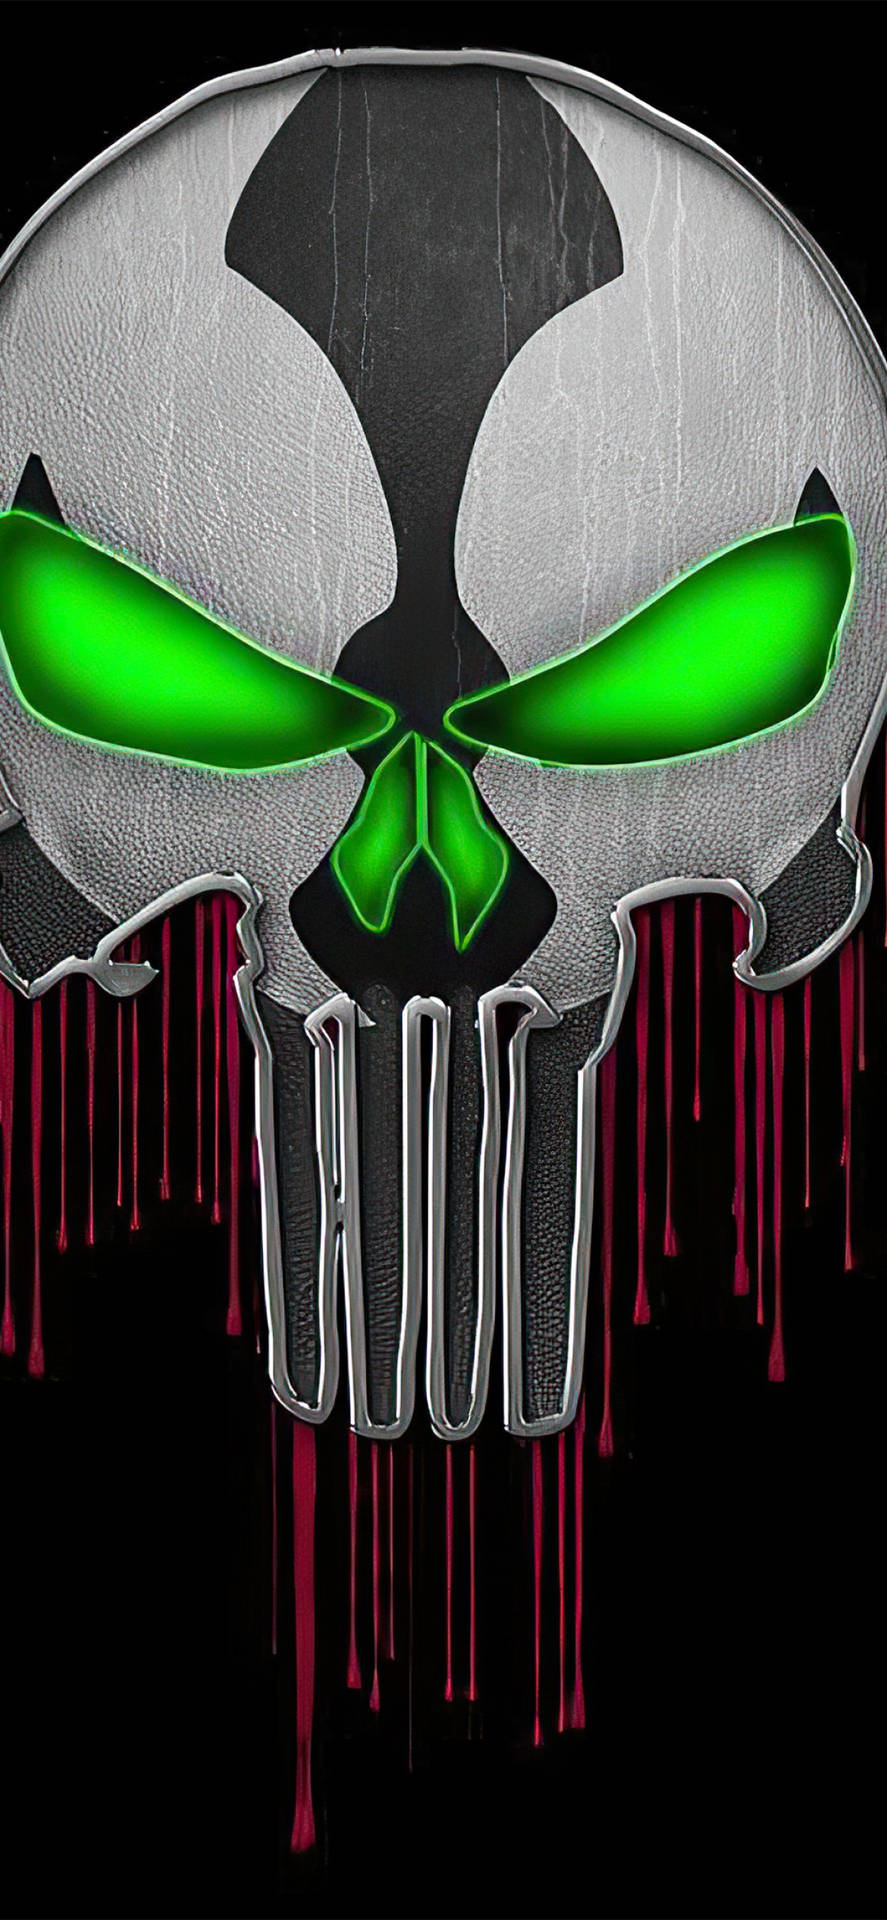 The iconic image of justice - The Punisher Skull Wallpaper